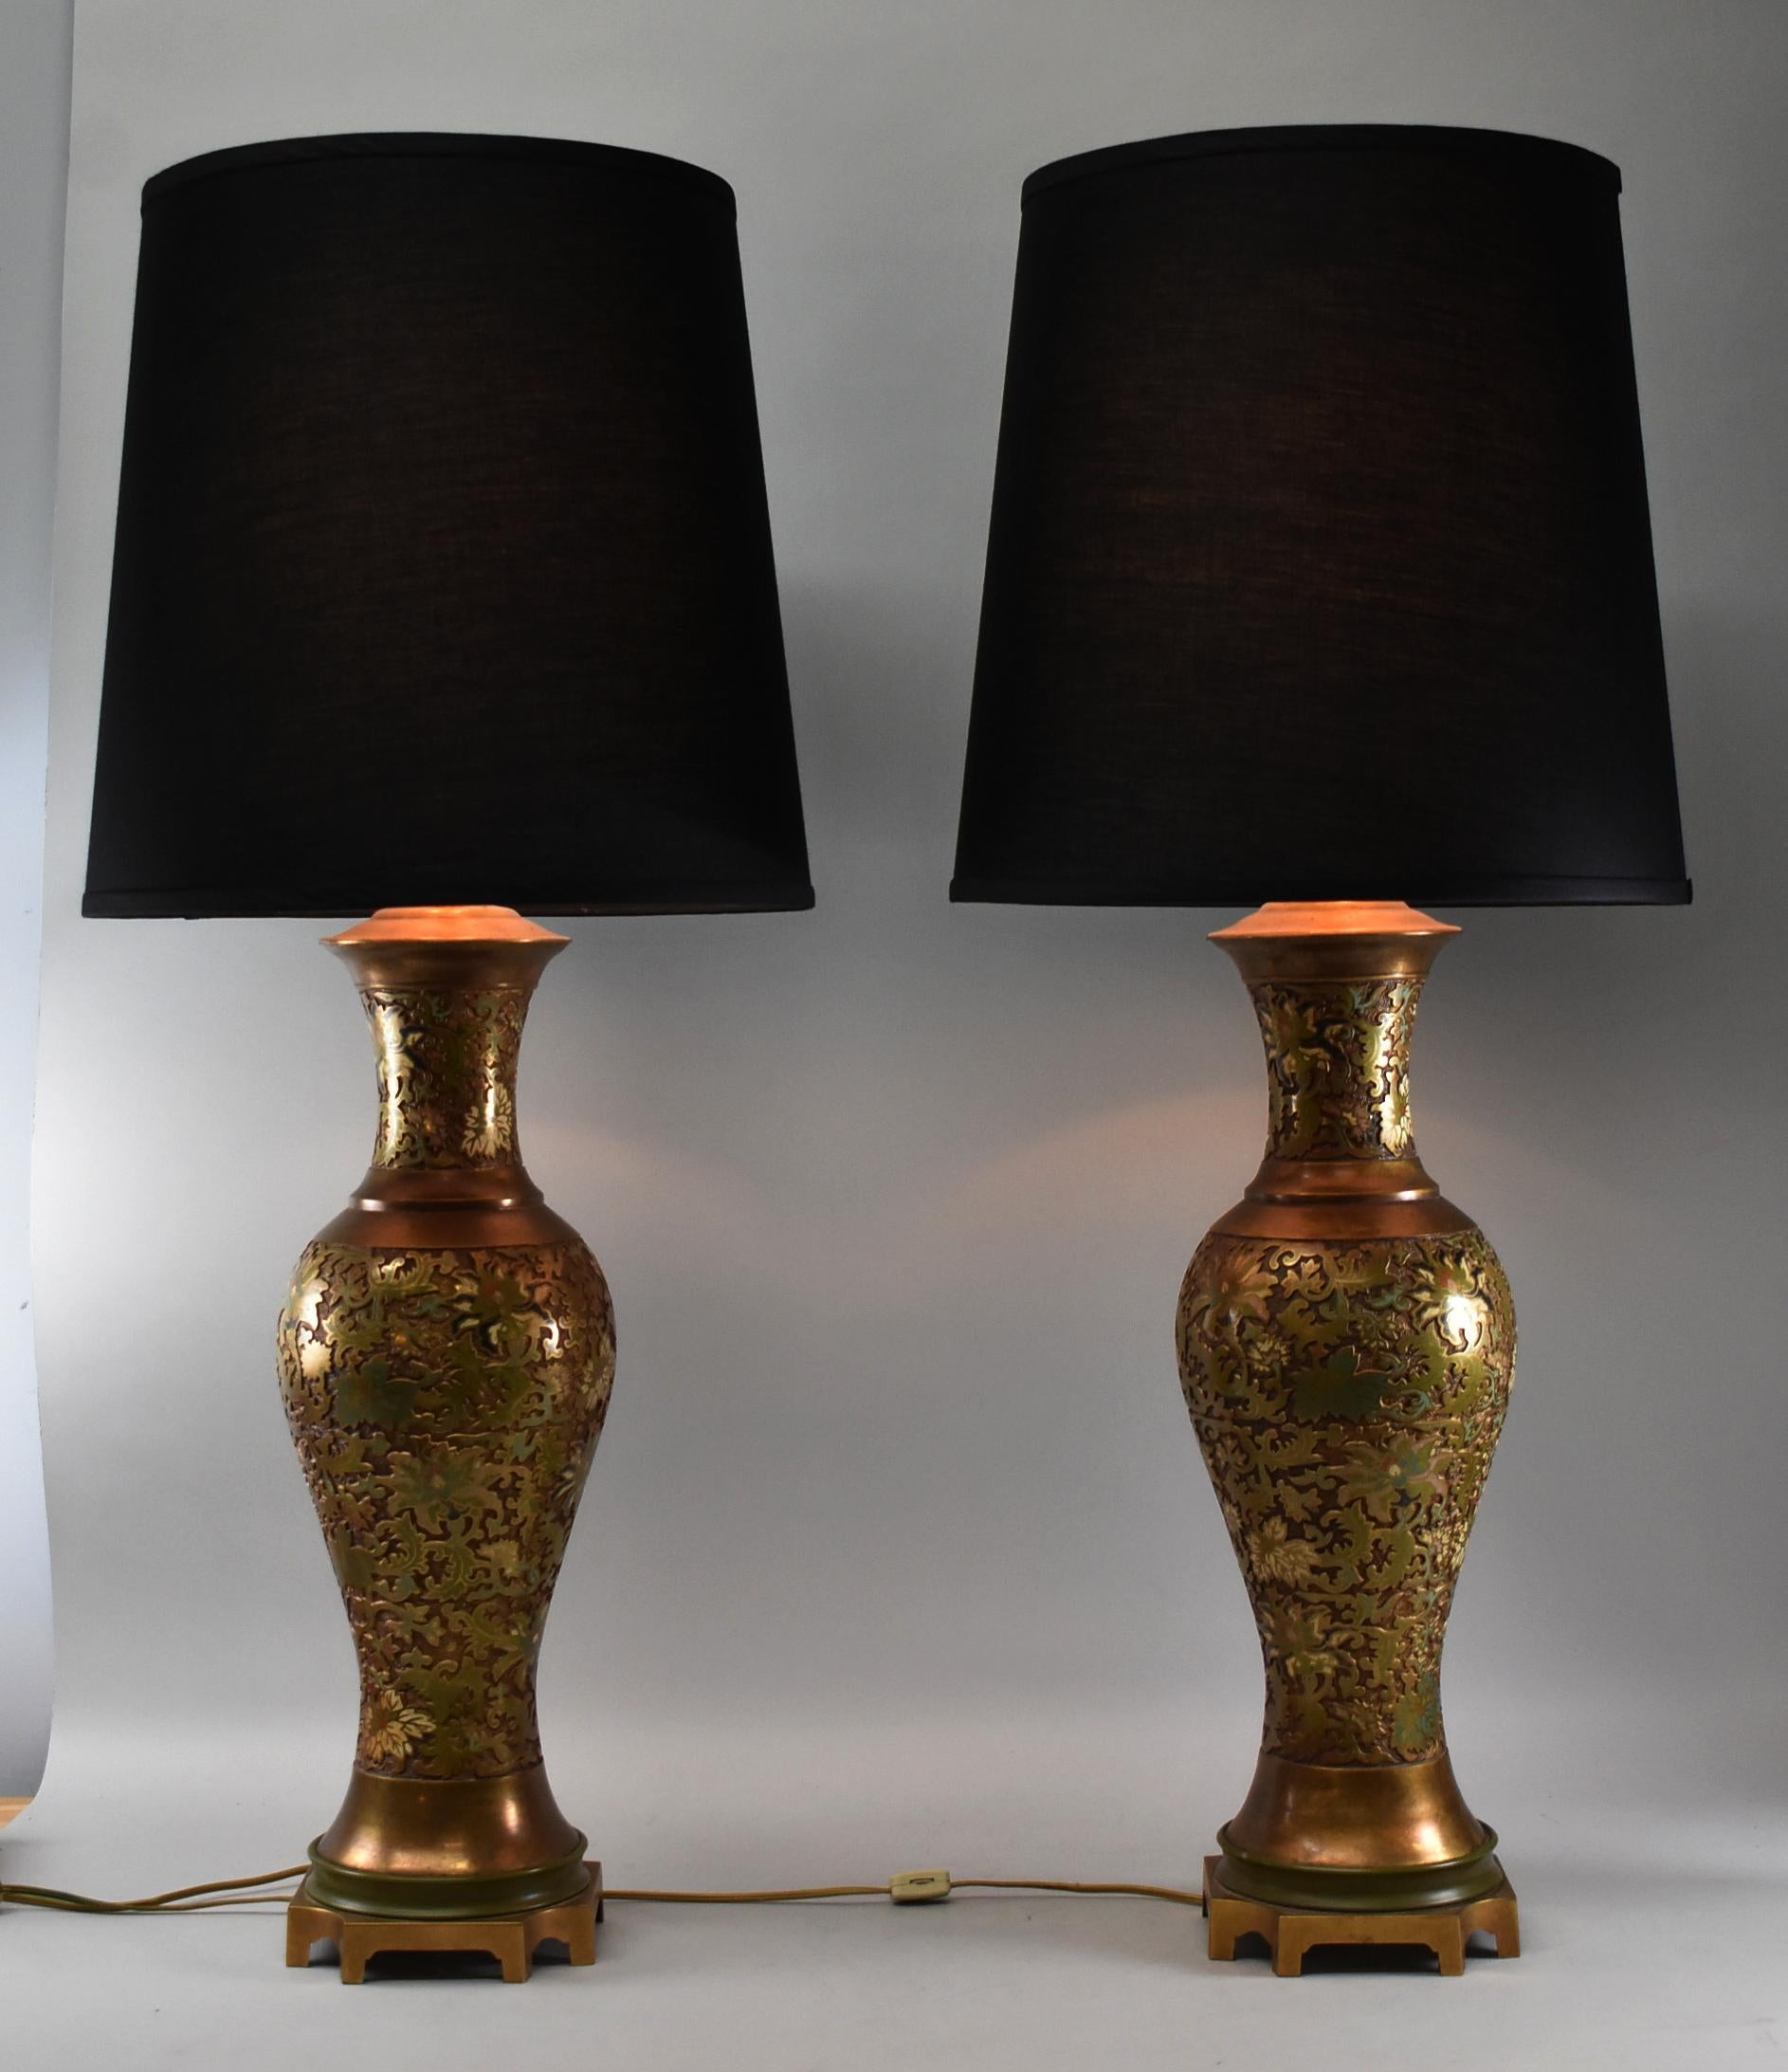 Pair of Marbo brass enamel floral design two socket table lamps. Ginger jar Asian shaped base with black linen shades.